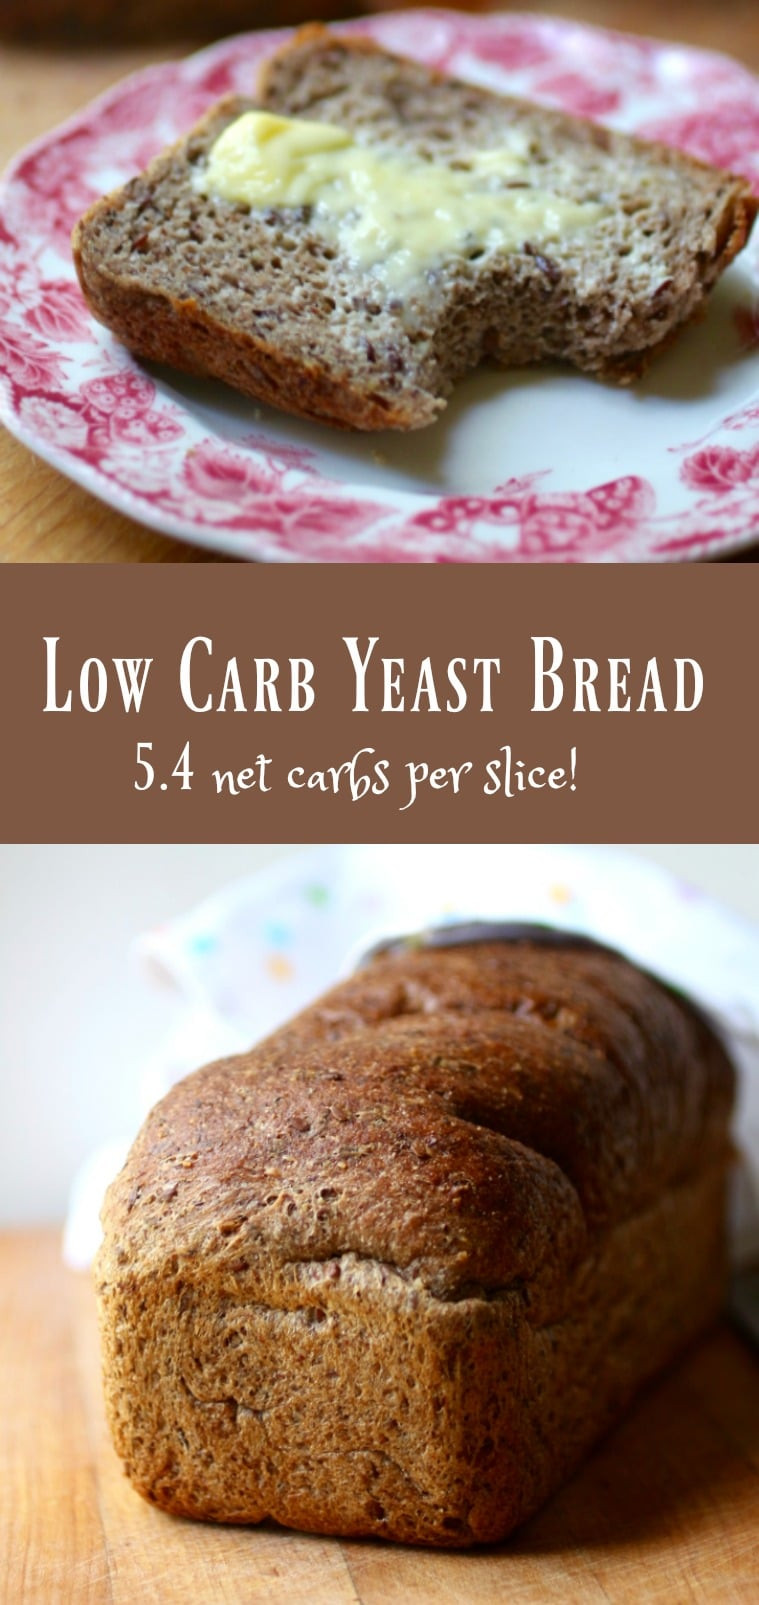 Keto Sandwich Bread With Yeast
 Low Carb Yeast Bread Keto Sandwich Bread lowcarb ology